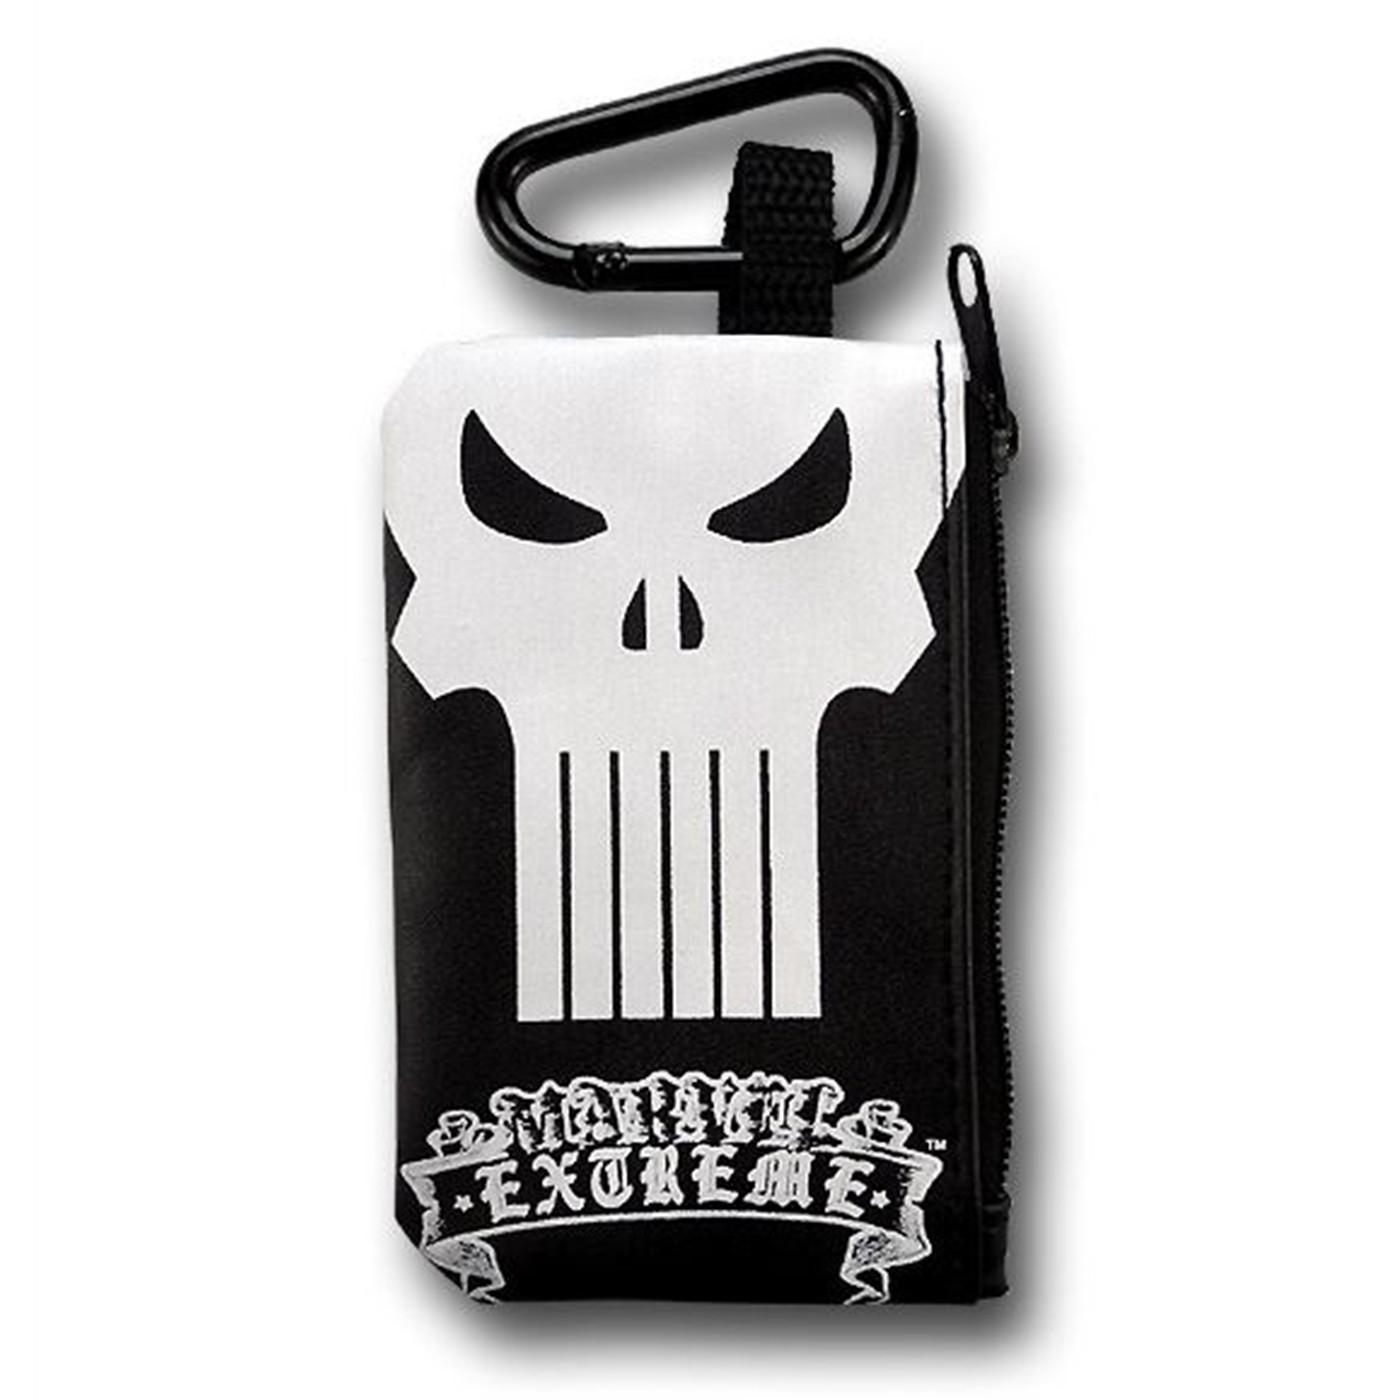 Punisher Key Chain & Card/Coin Case